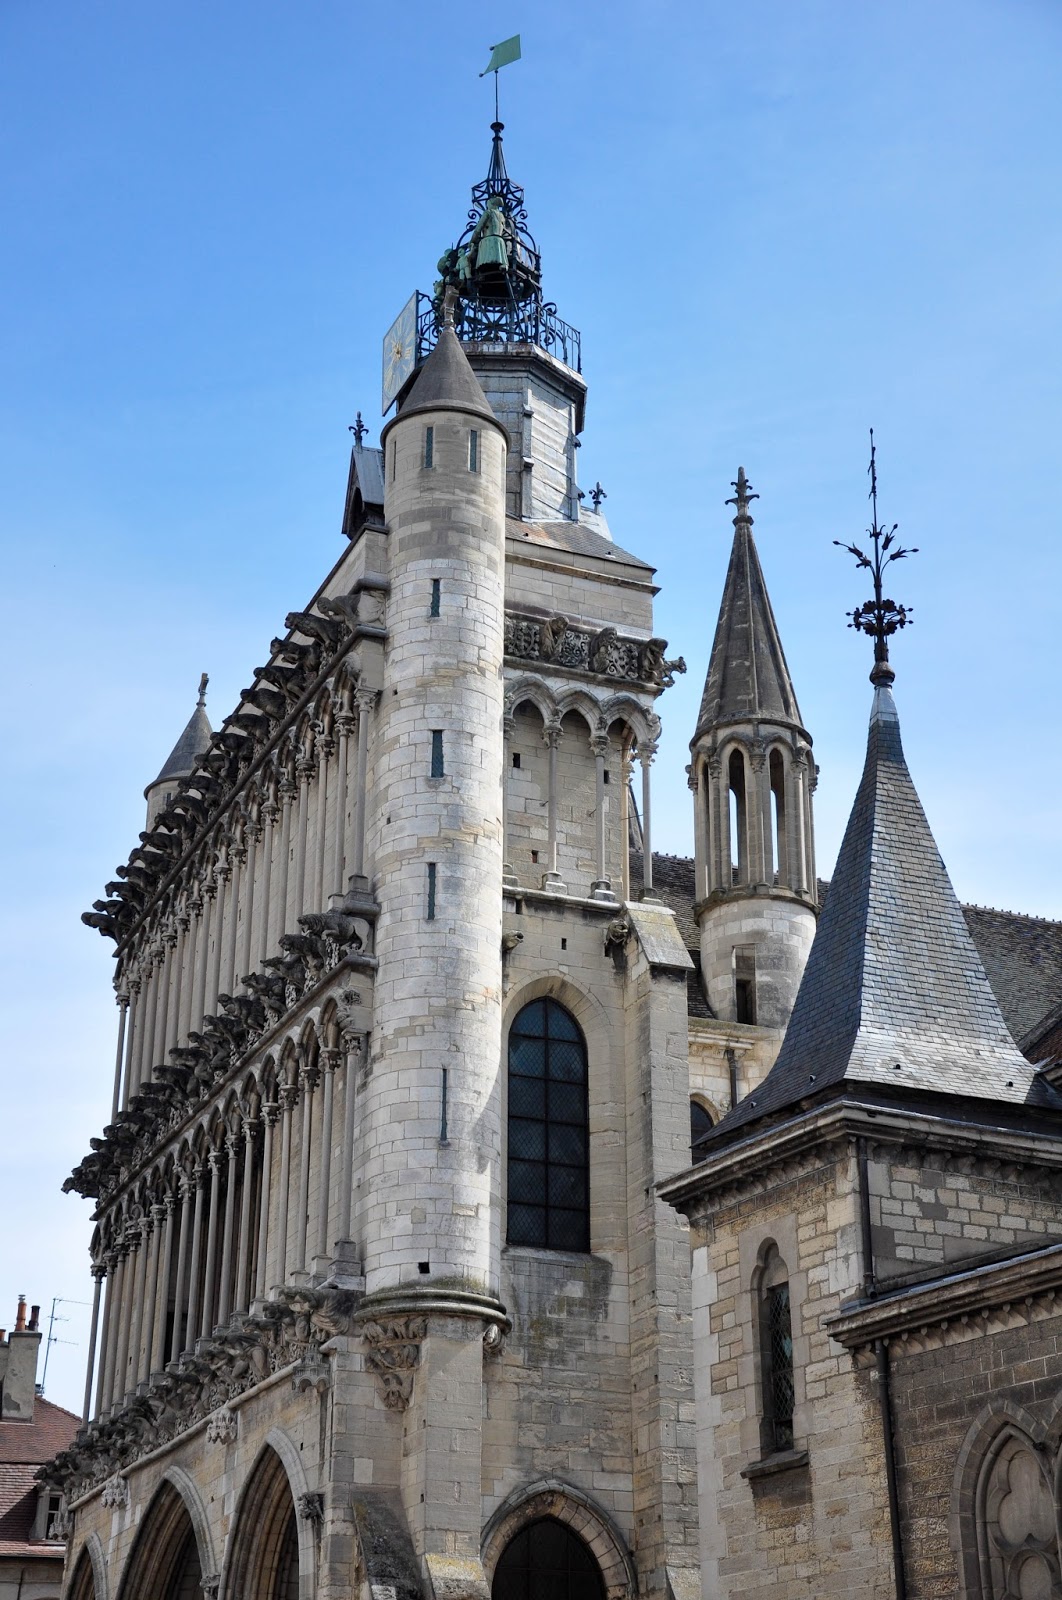 The facade of the Church of Notre-Dame in Dijon, Burgundy, France